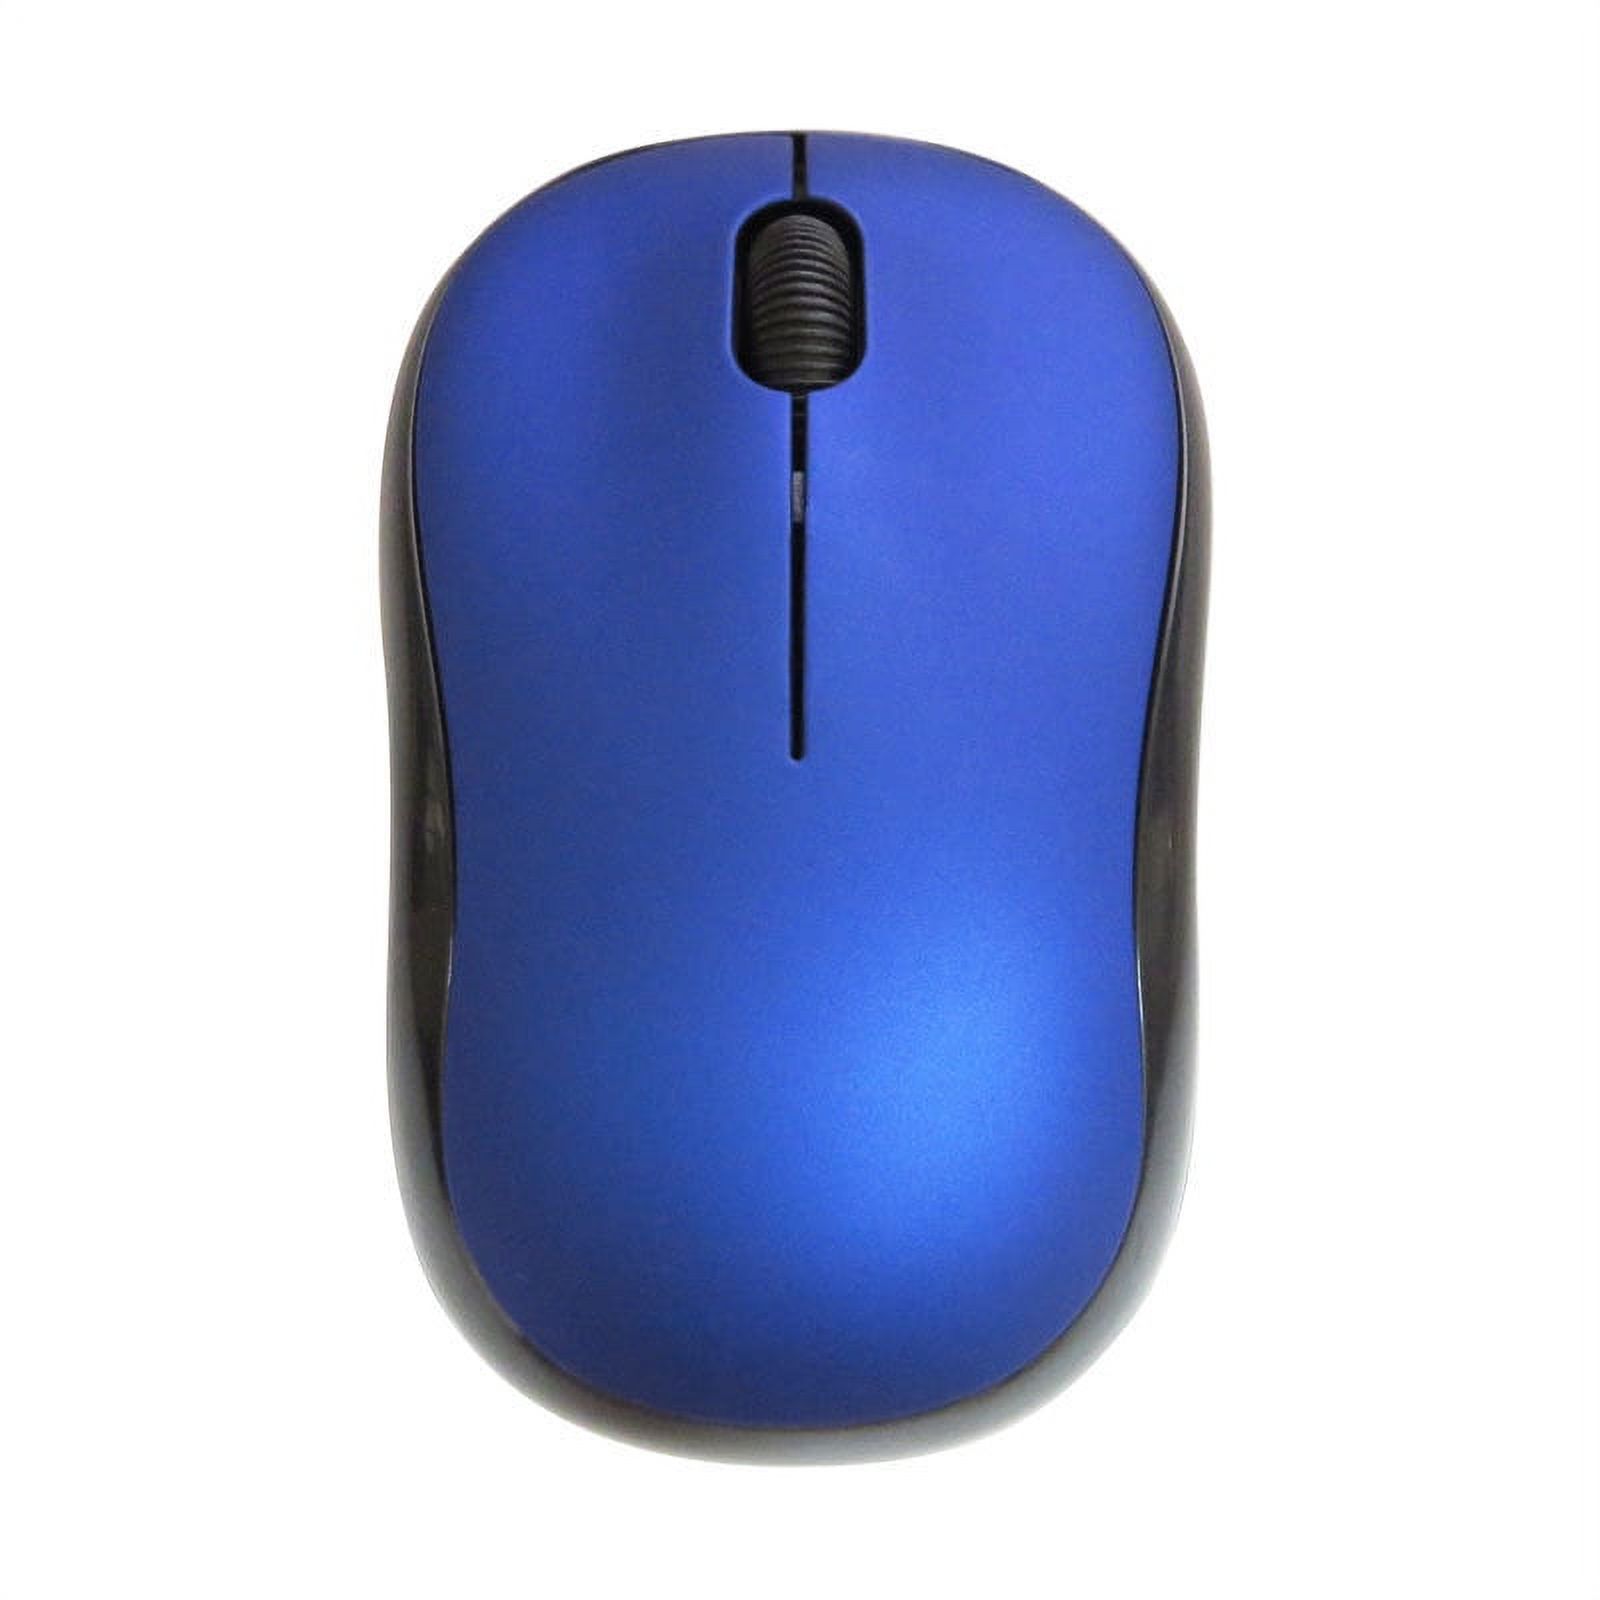 Logitech Compact Wireless Mouse, 2.4 GHz with USB Unifying Receiver, Optical Tracking, Blue - image 5 of 6